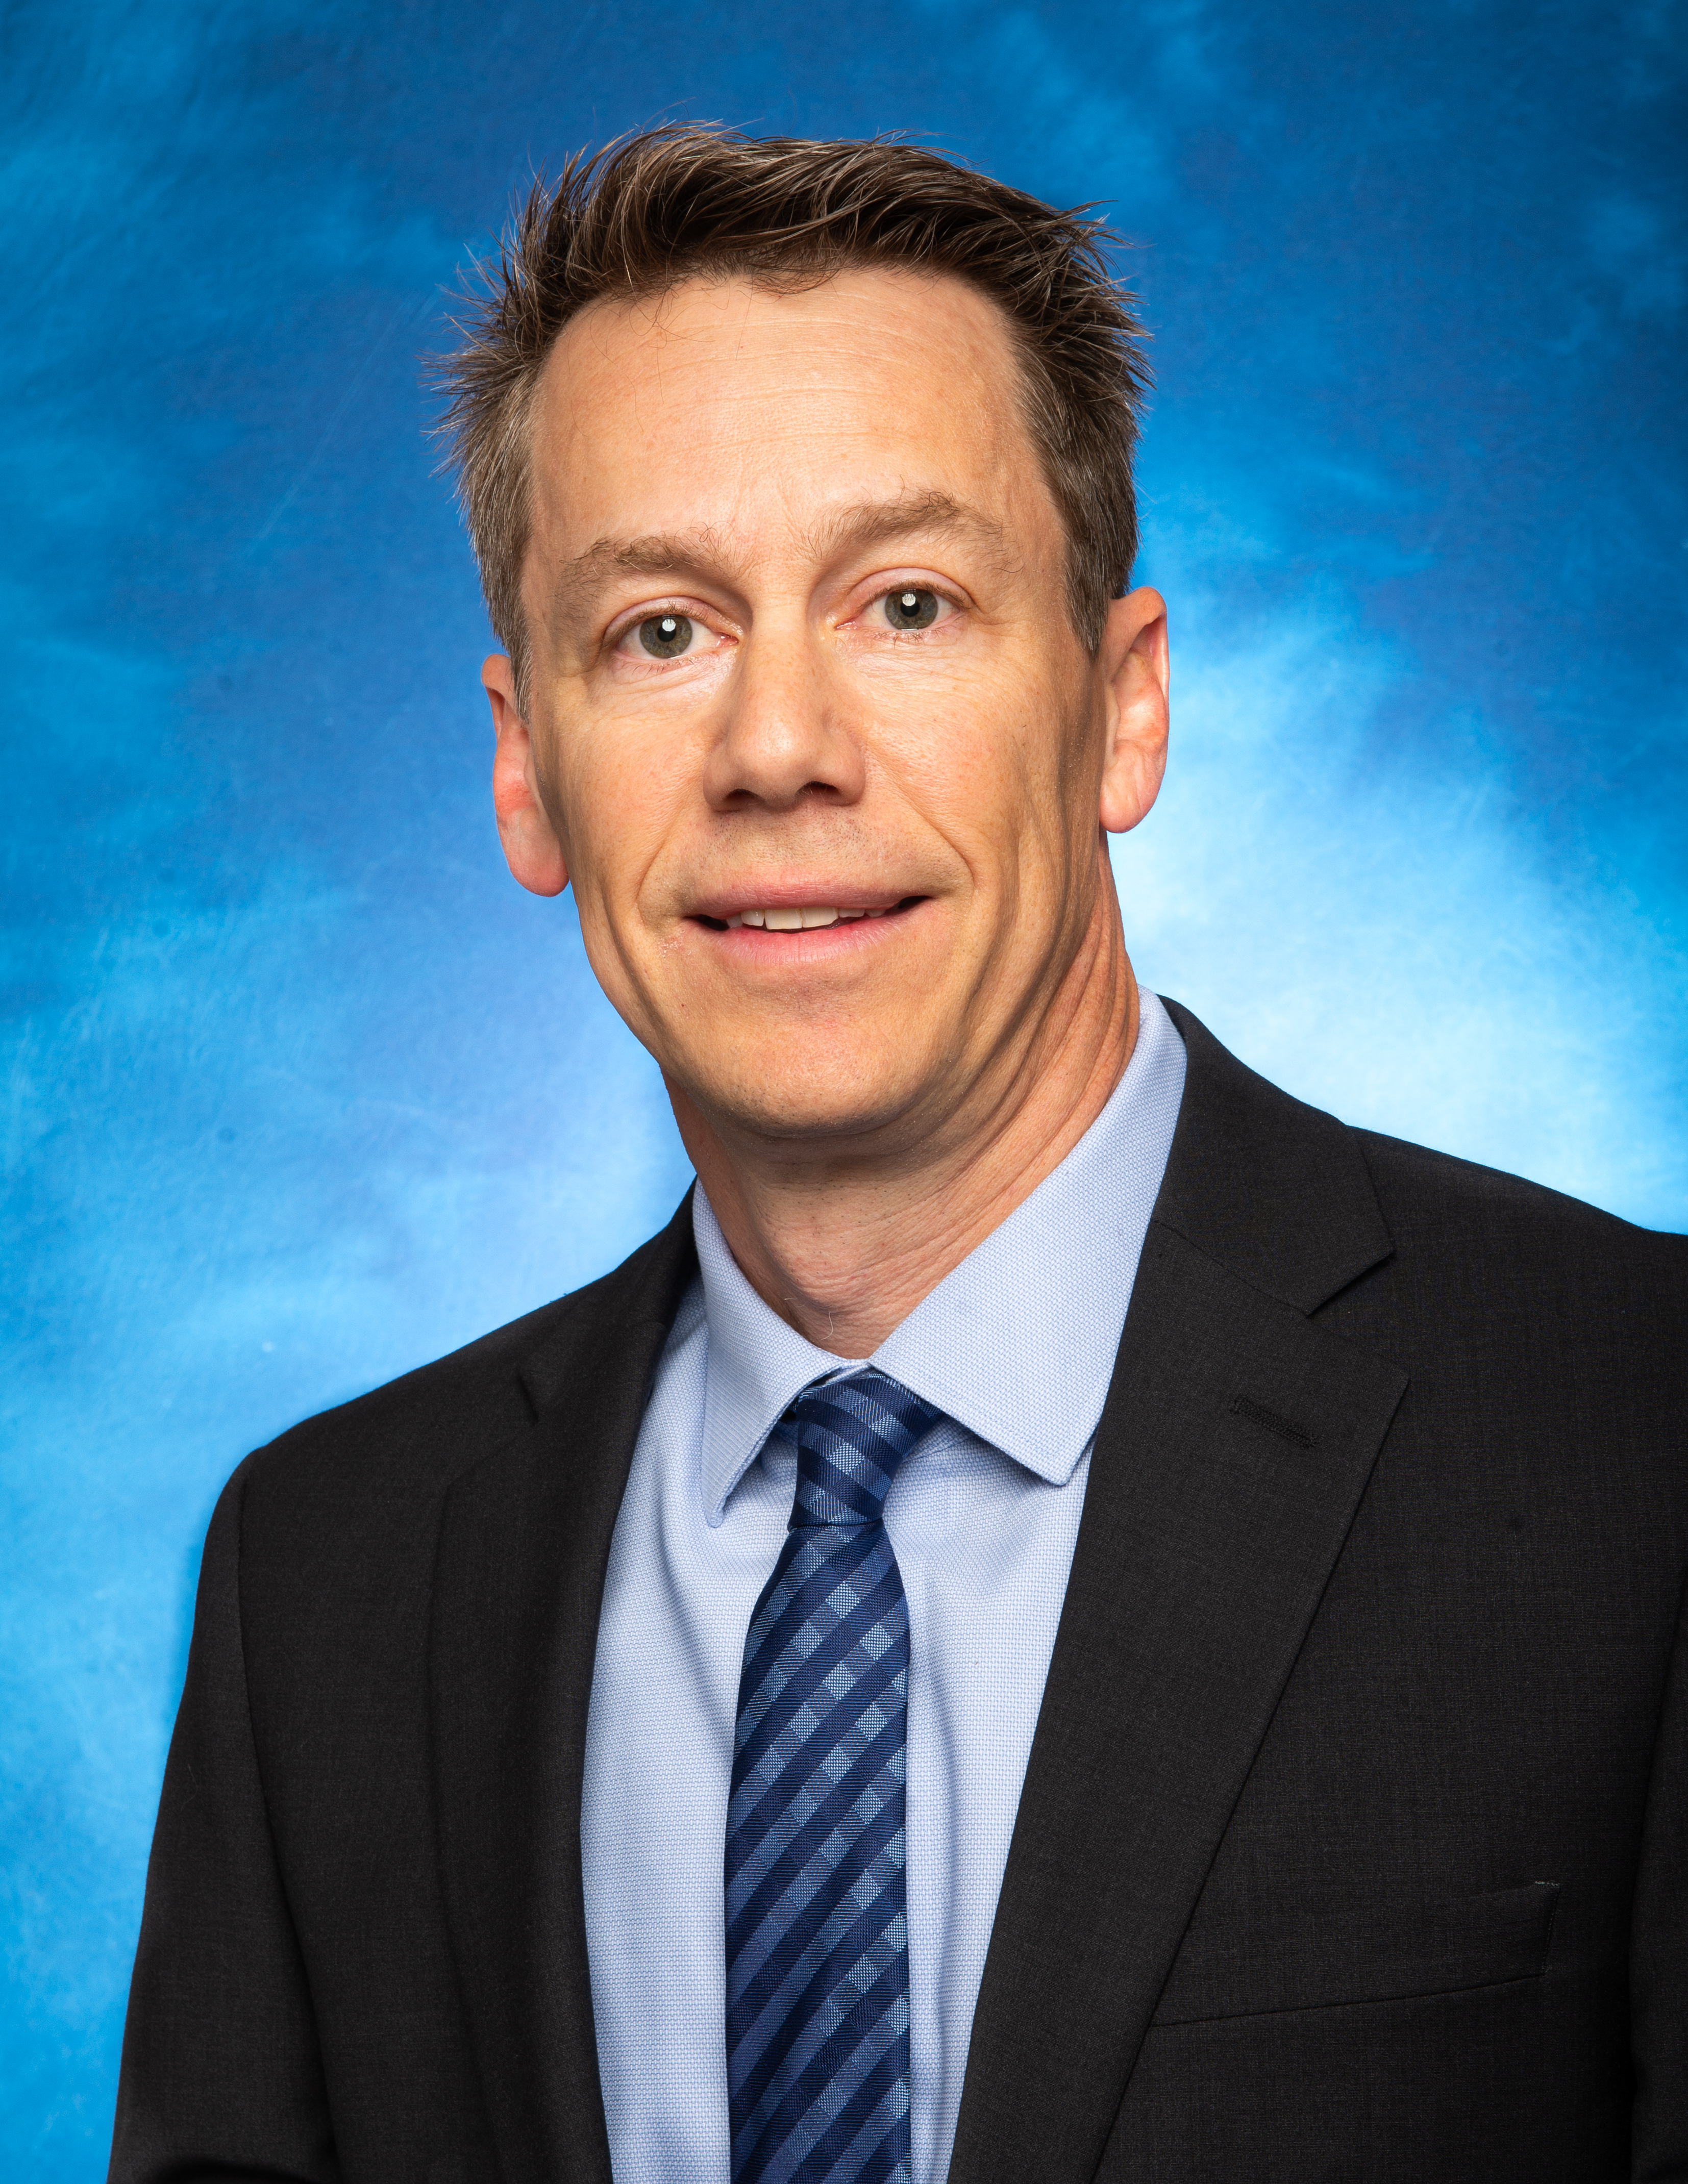 Andrew Wittenberg, MD, MPH, FACEP